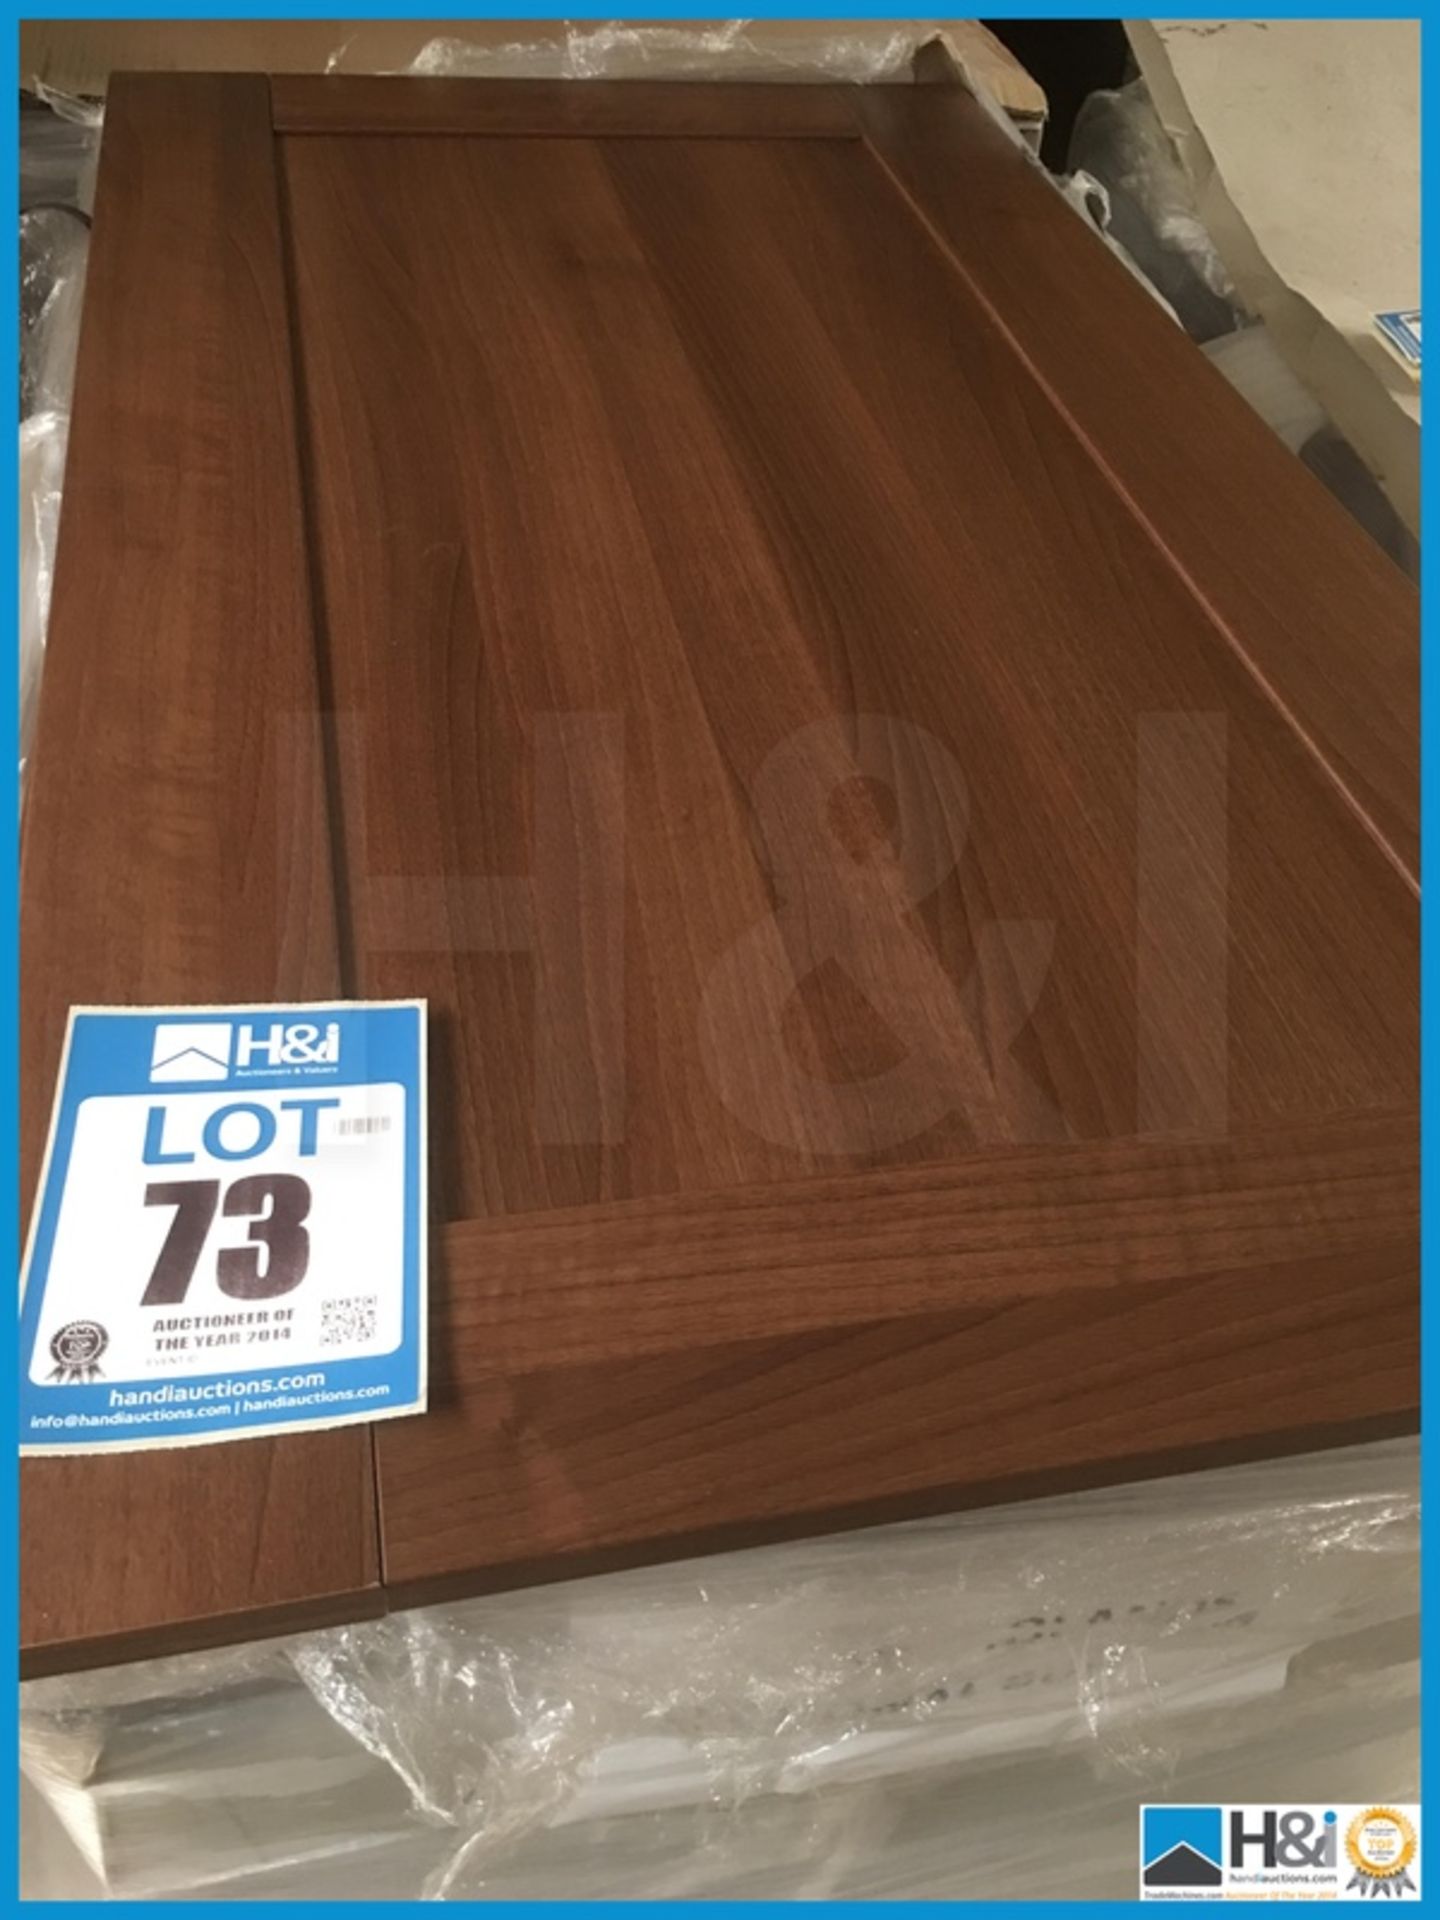 Approx x 28 1066 mm X 595 mm American walnut contemporary kitchen door with retail value of lot £